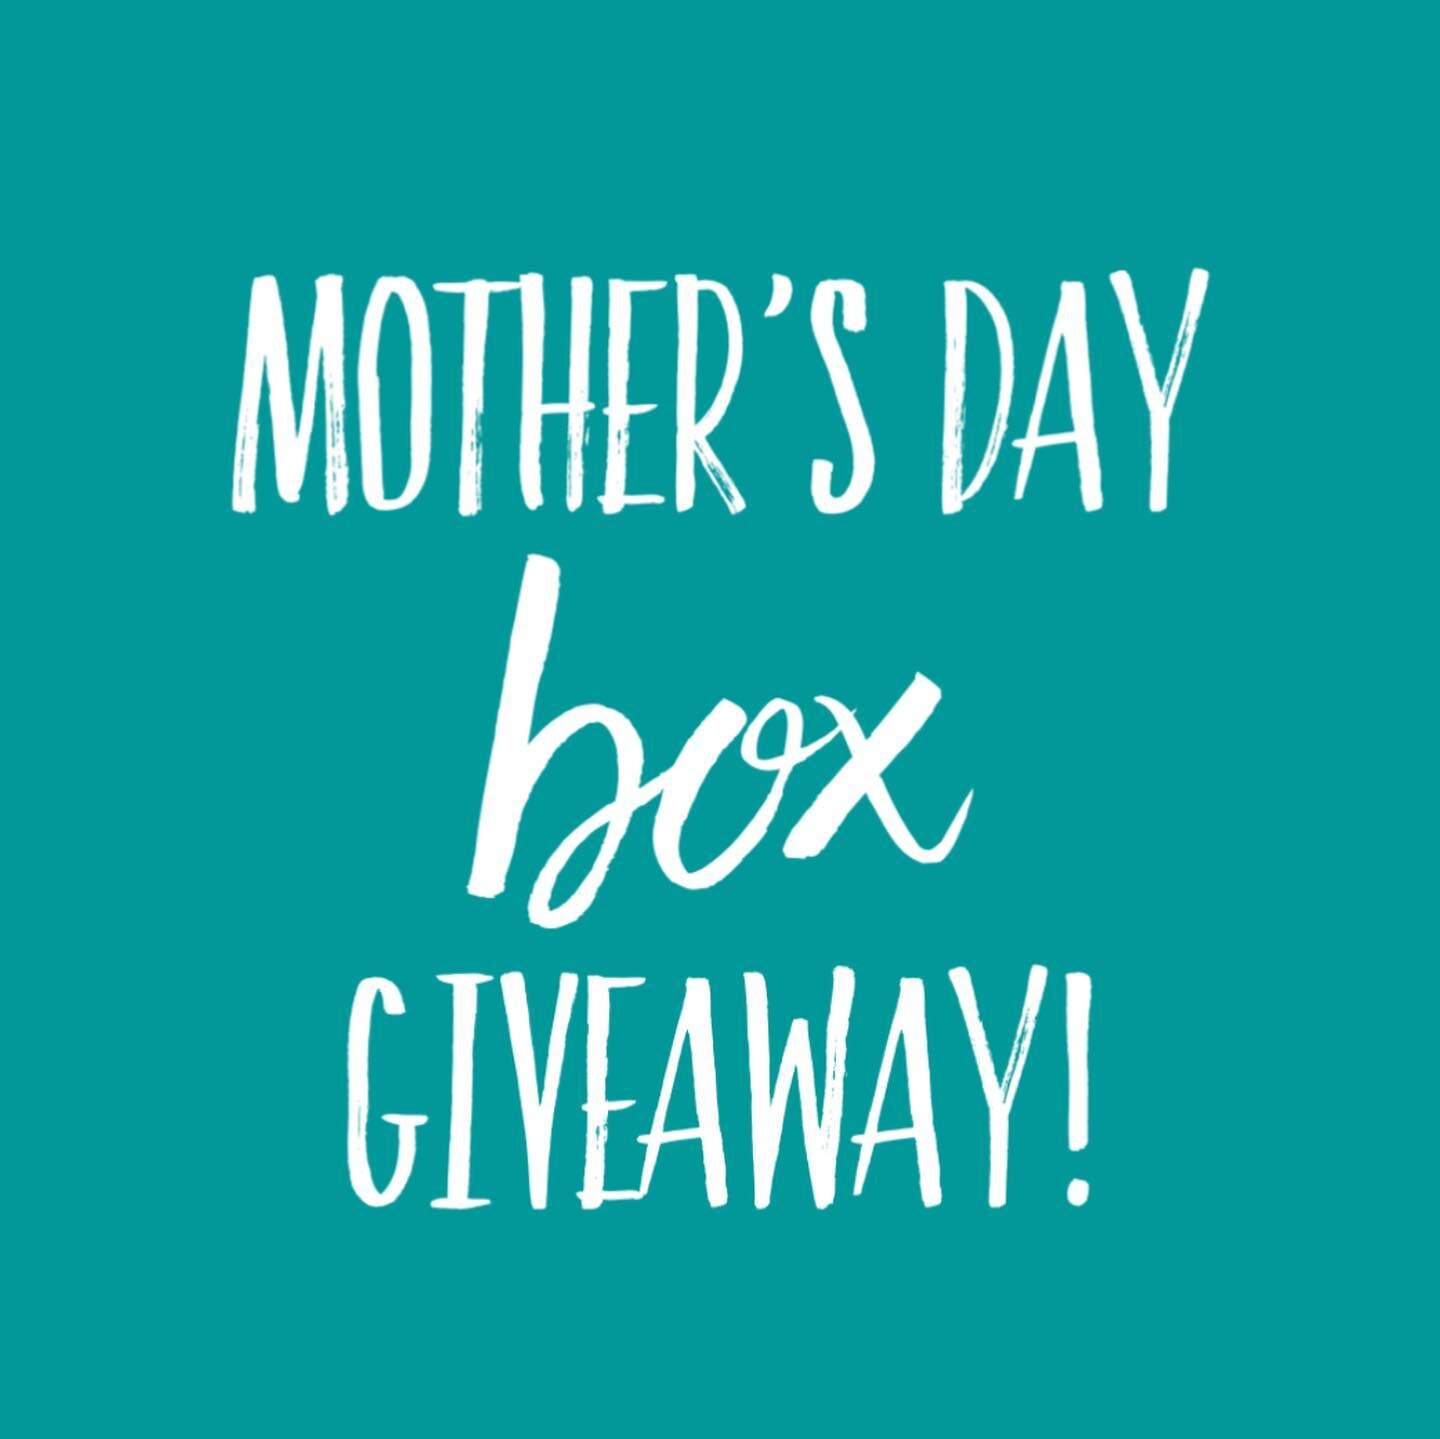 .. ✨CLOSED. attention attention 🗣 you read that correct! I saved a Mother&rsquo;s Day box for one lucky mama! 😍
&bull;tag below a mama you think deserves a little extra love this Mother&rsquo;s Day! 
&bull;share in stories for an extra entry! 
&bul